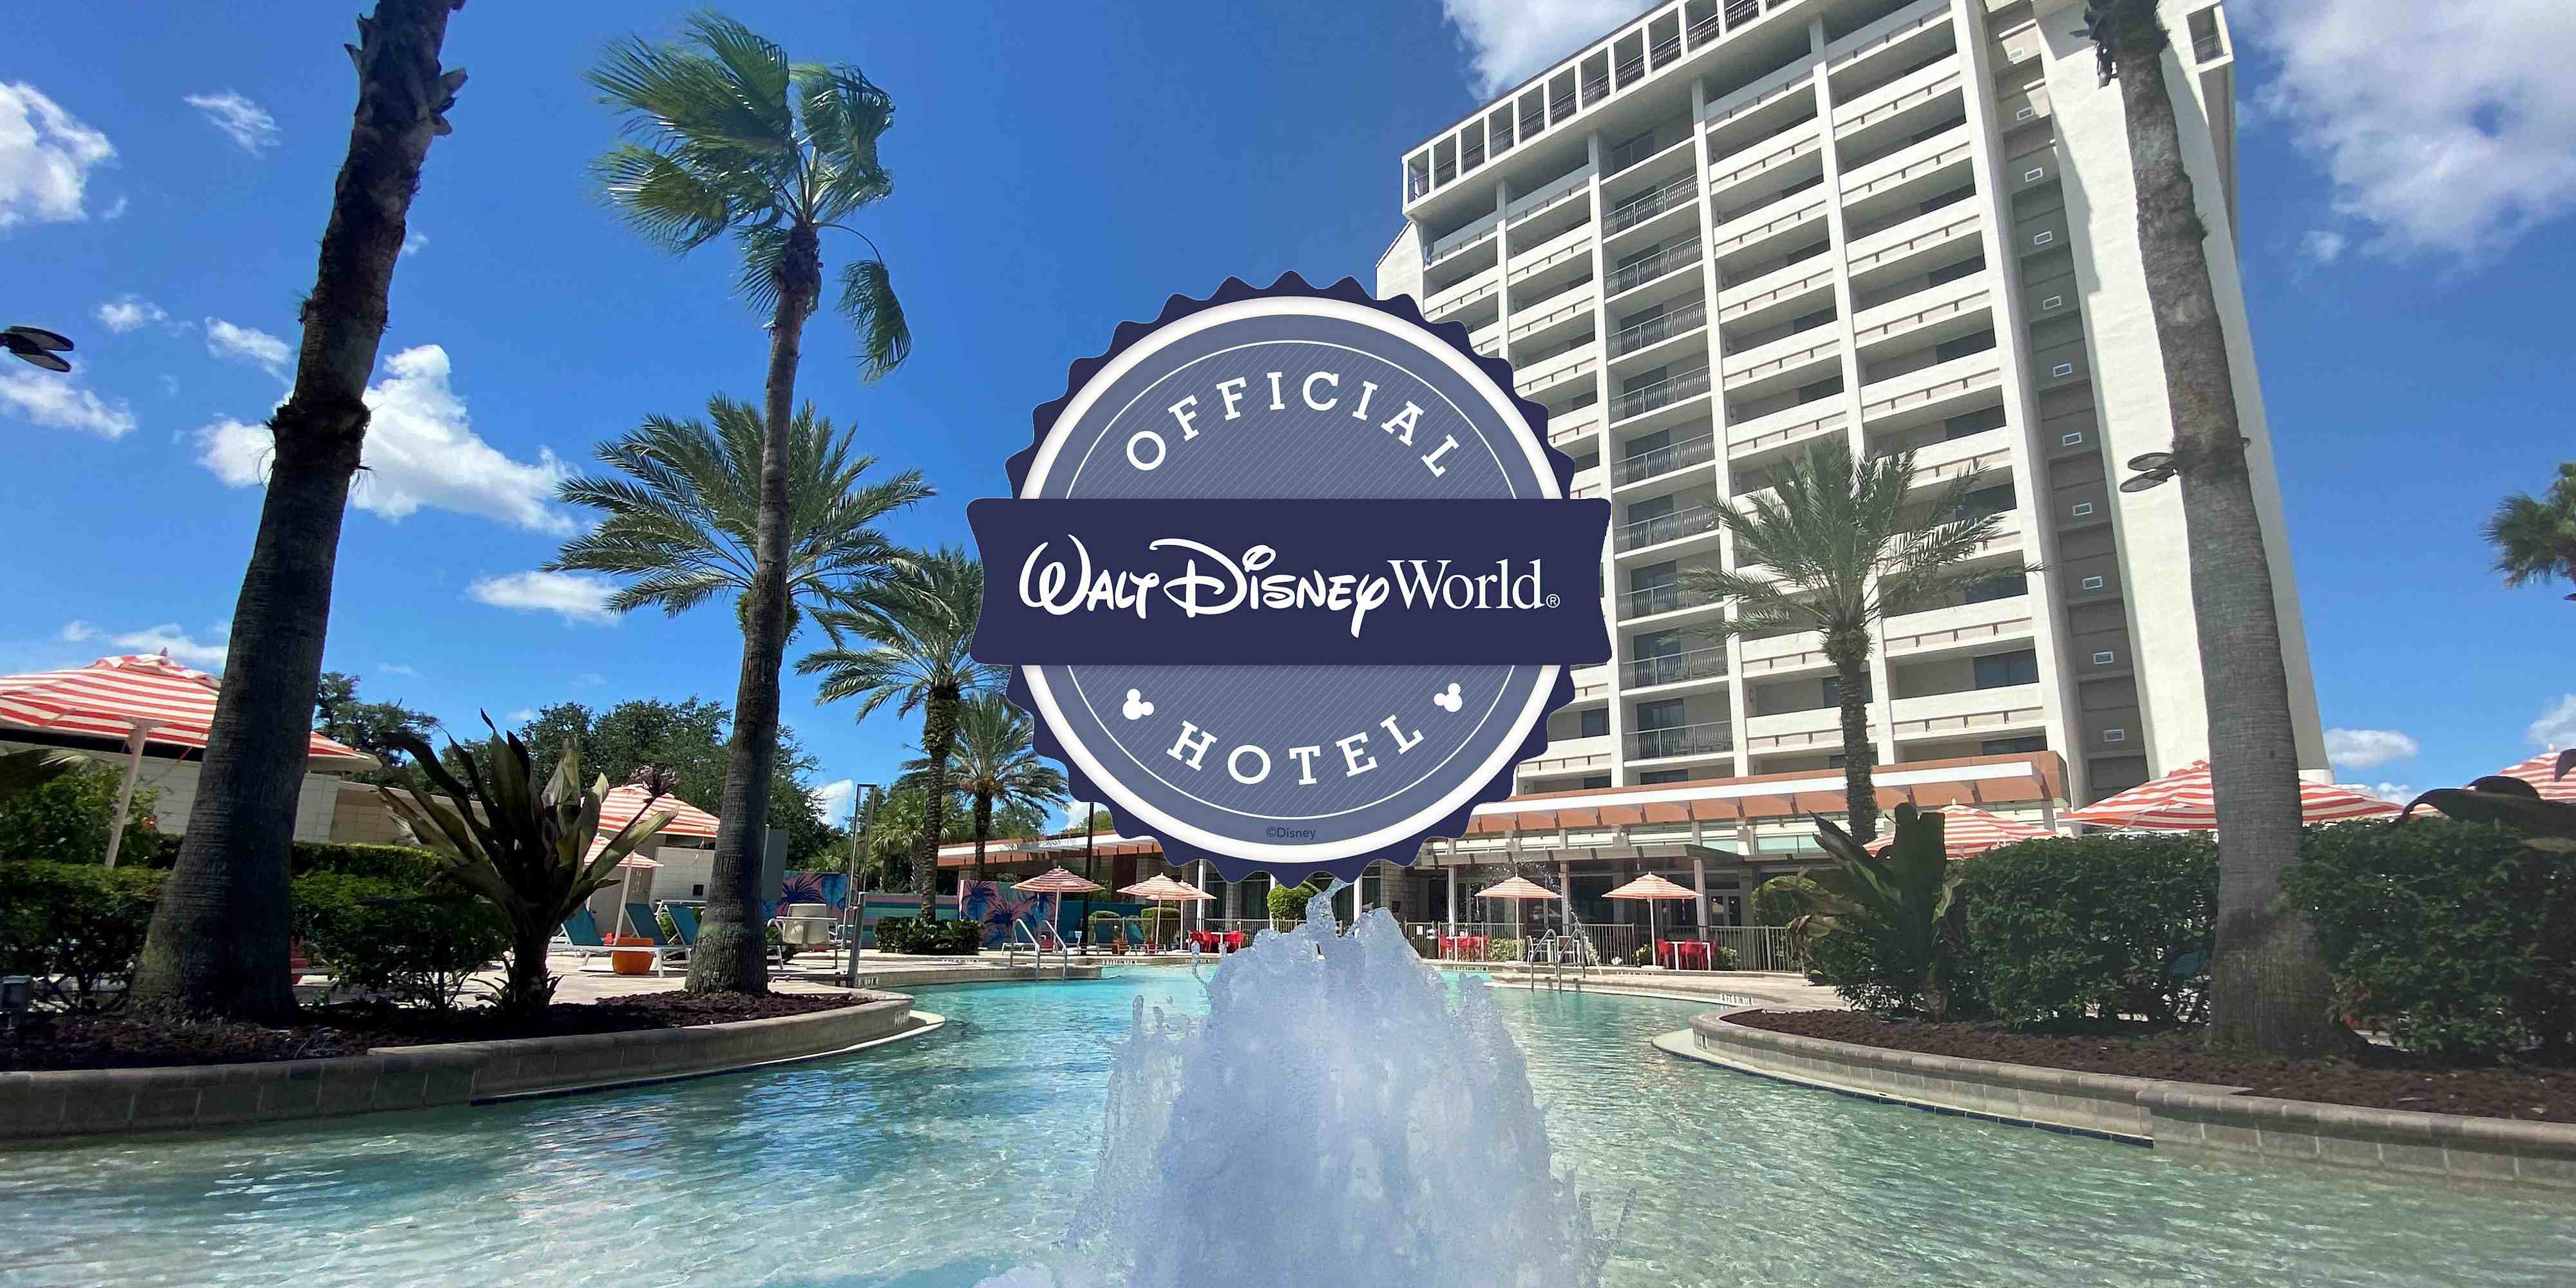 Exterior view of the pool and hotel facade with Offical Walt Disney World Hotel stamp overlaid